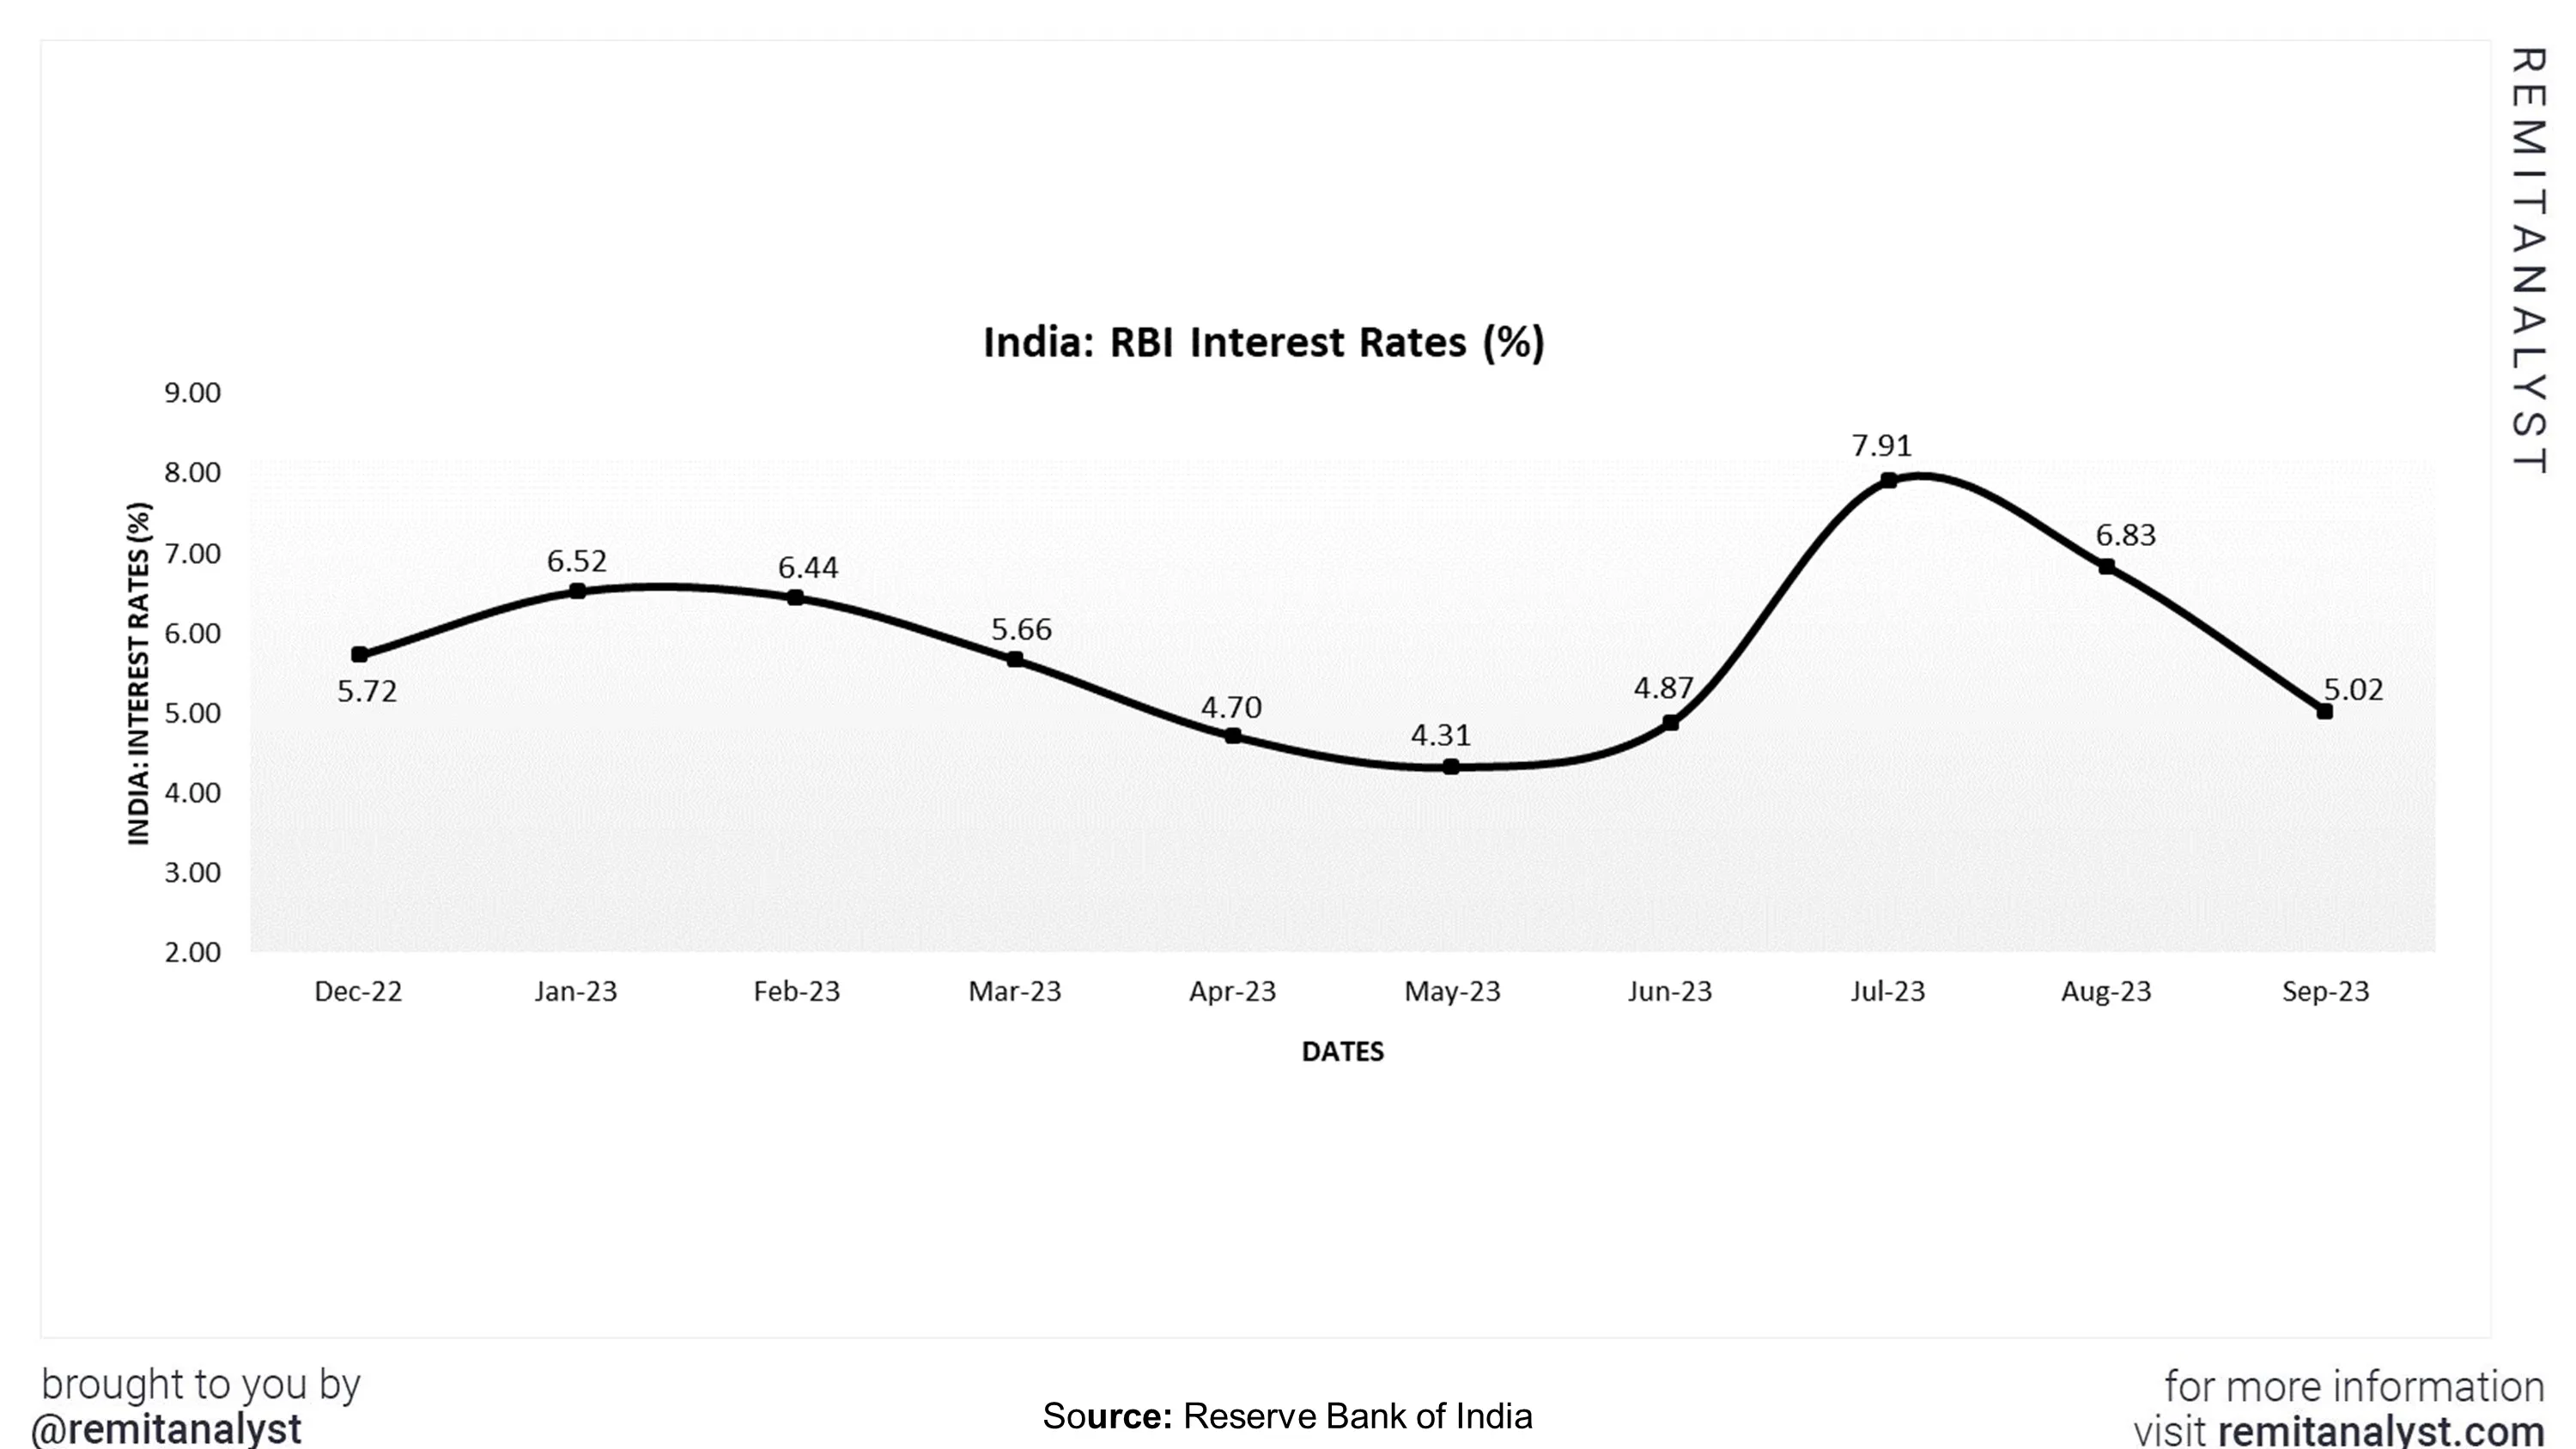 interest-rates-india-from-dec-2022-to-sep-2023